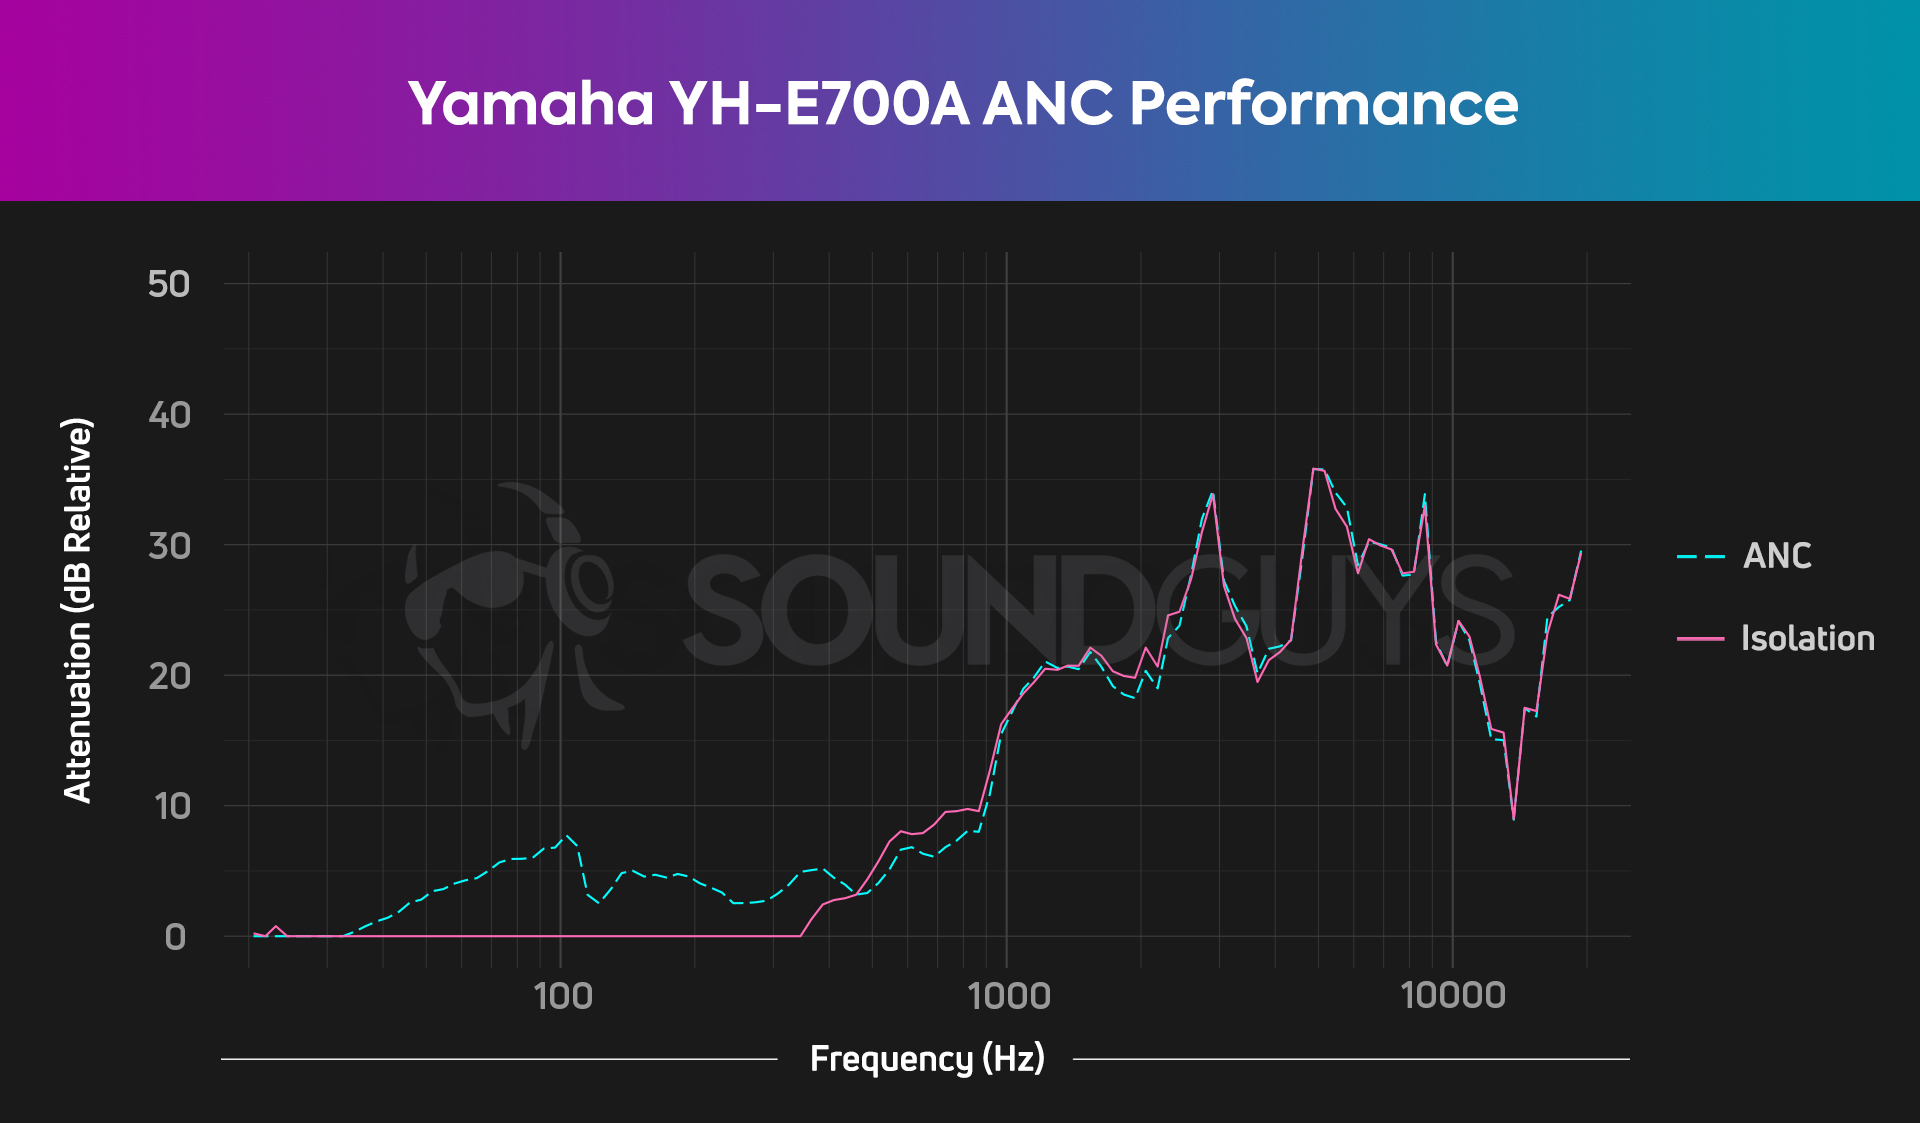 Chart depicting the isolation and active noise canceling performance of the Yamaha YH-E700A, with isolation doing most of the attenuation.